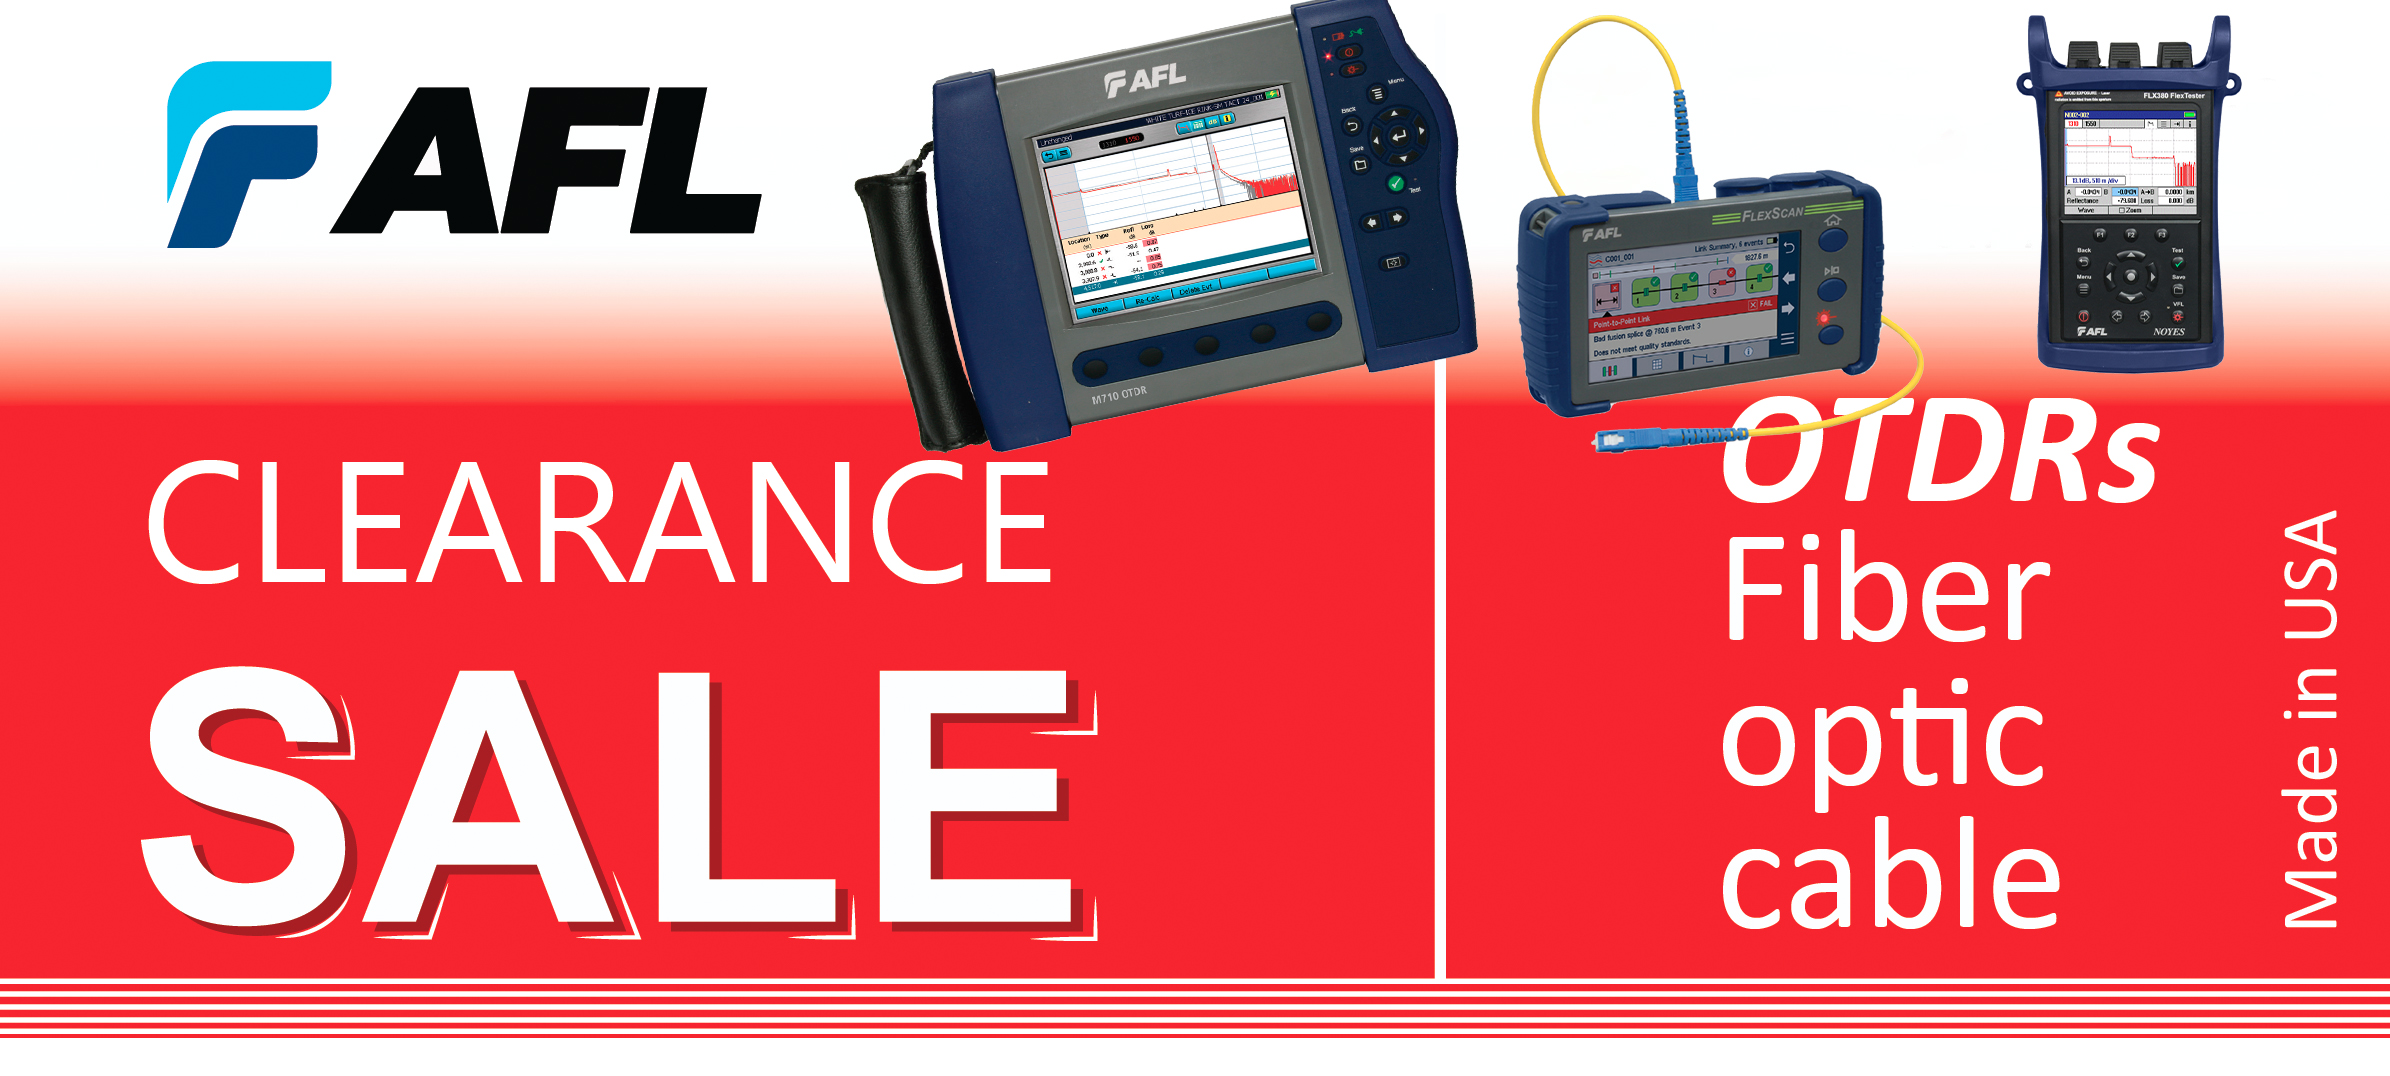 Clearance Sales OTDR of AFL Brand OCT 2020